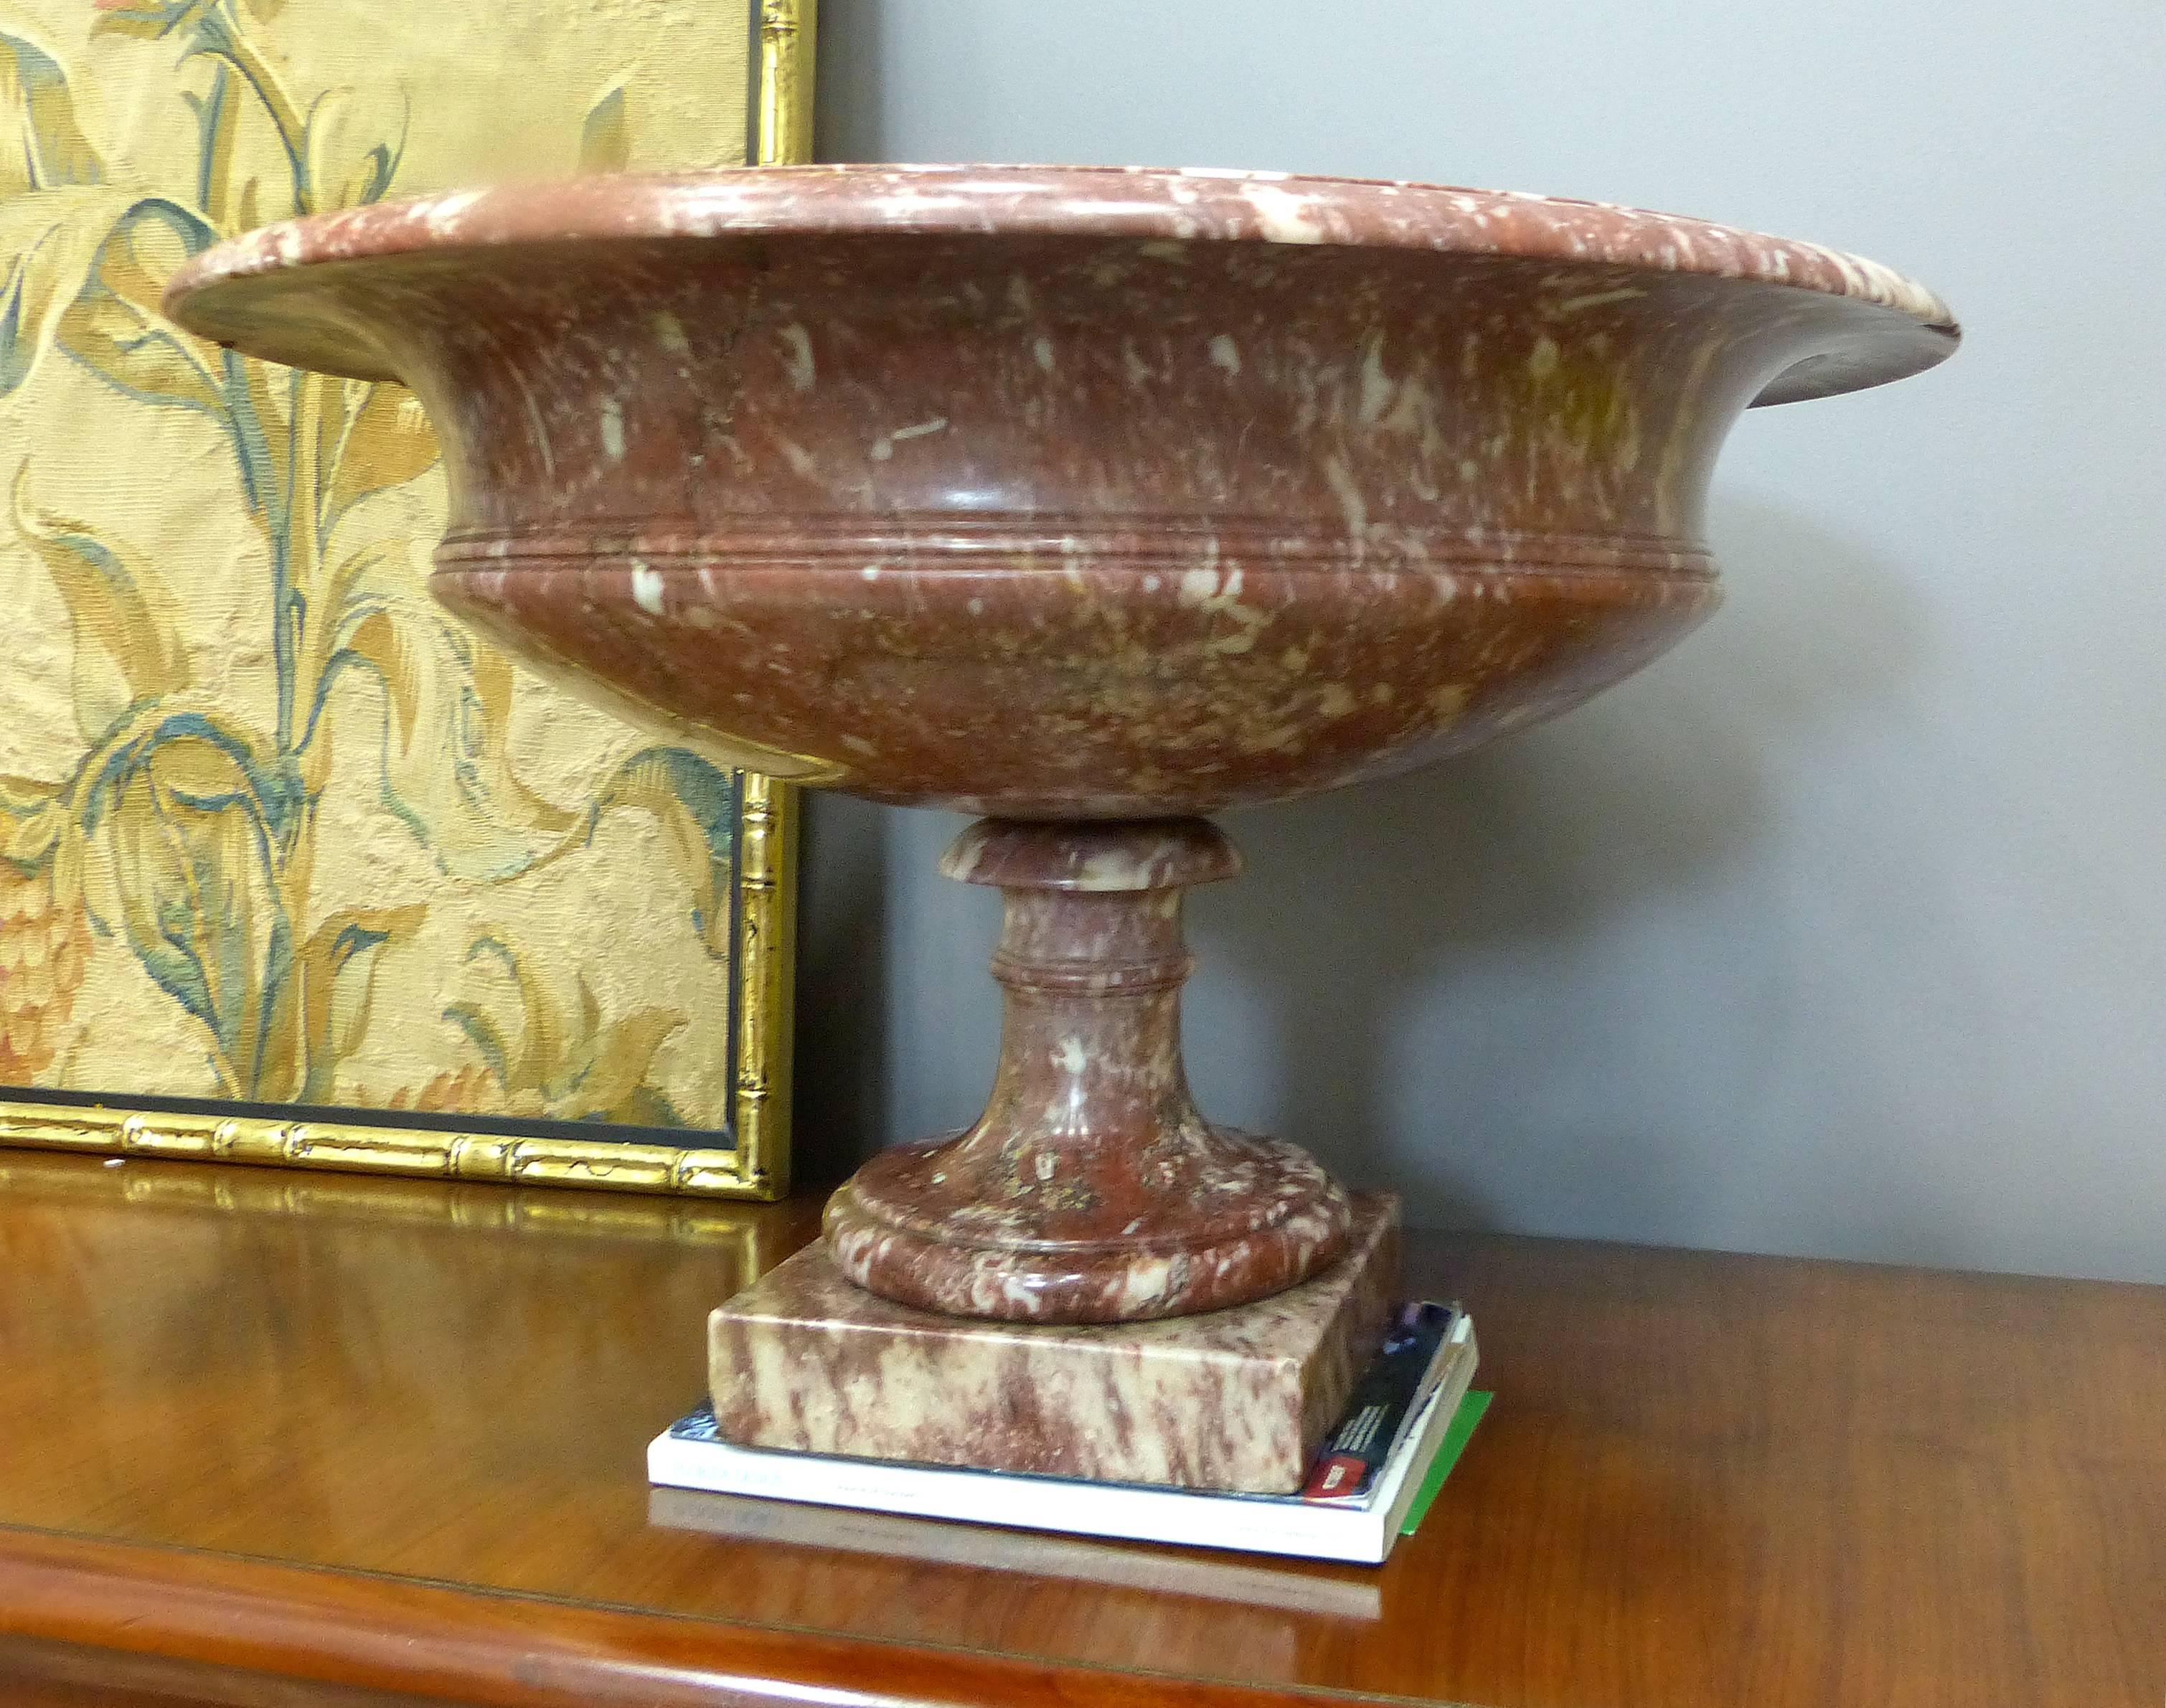 Pair of 19th Century Turned Rossa Verona Marble Tazzas

This is an impressive and substantial pair of classically designed Italian Rossa Verona marble urns on marble plinths. Base has measurements of 8.5